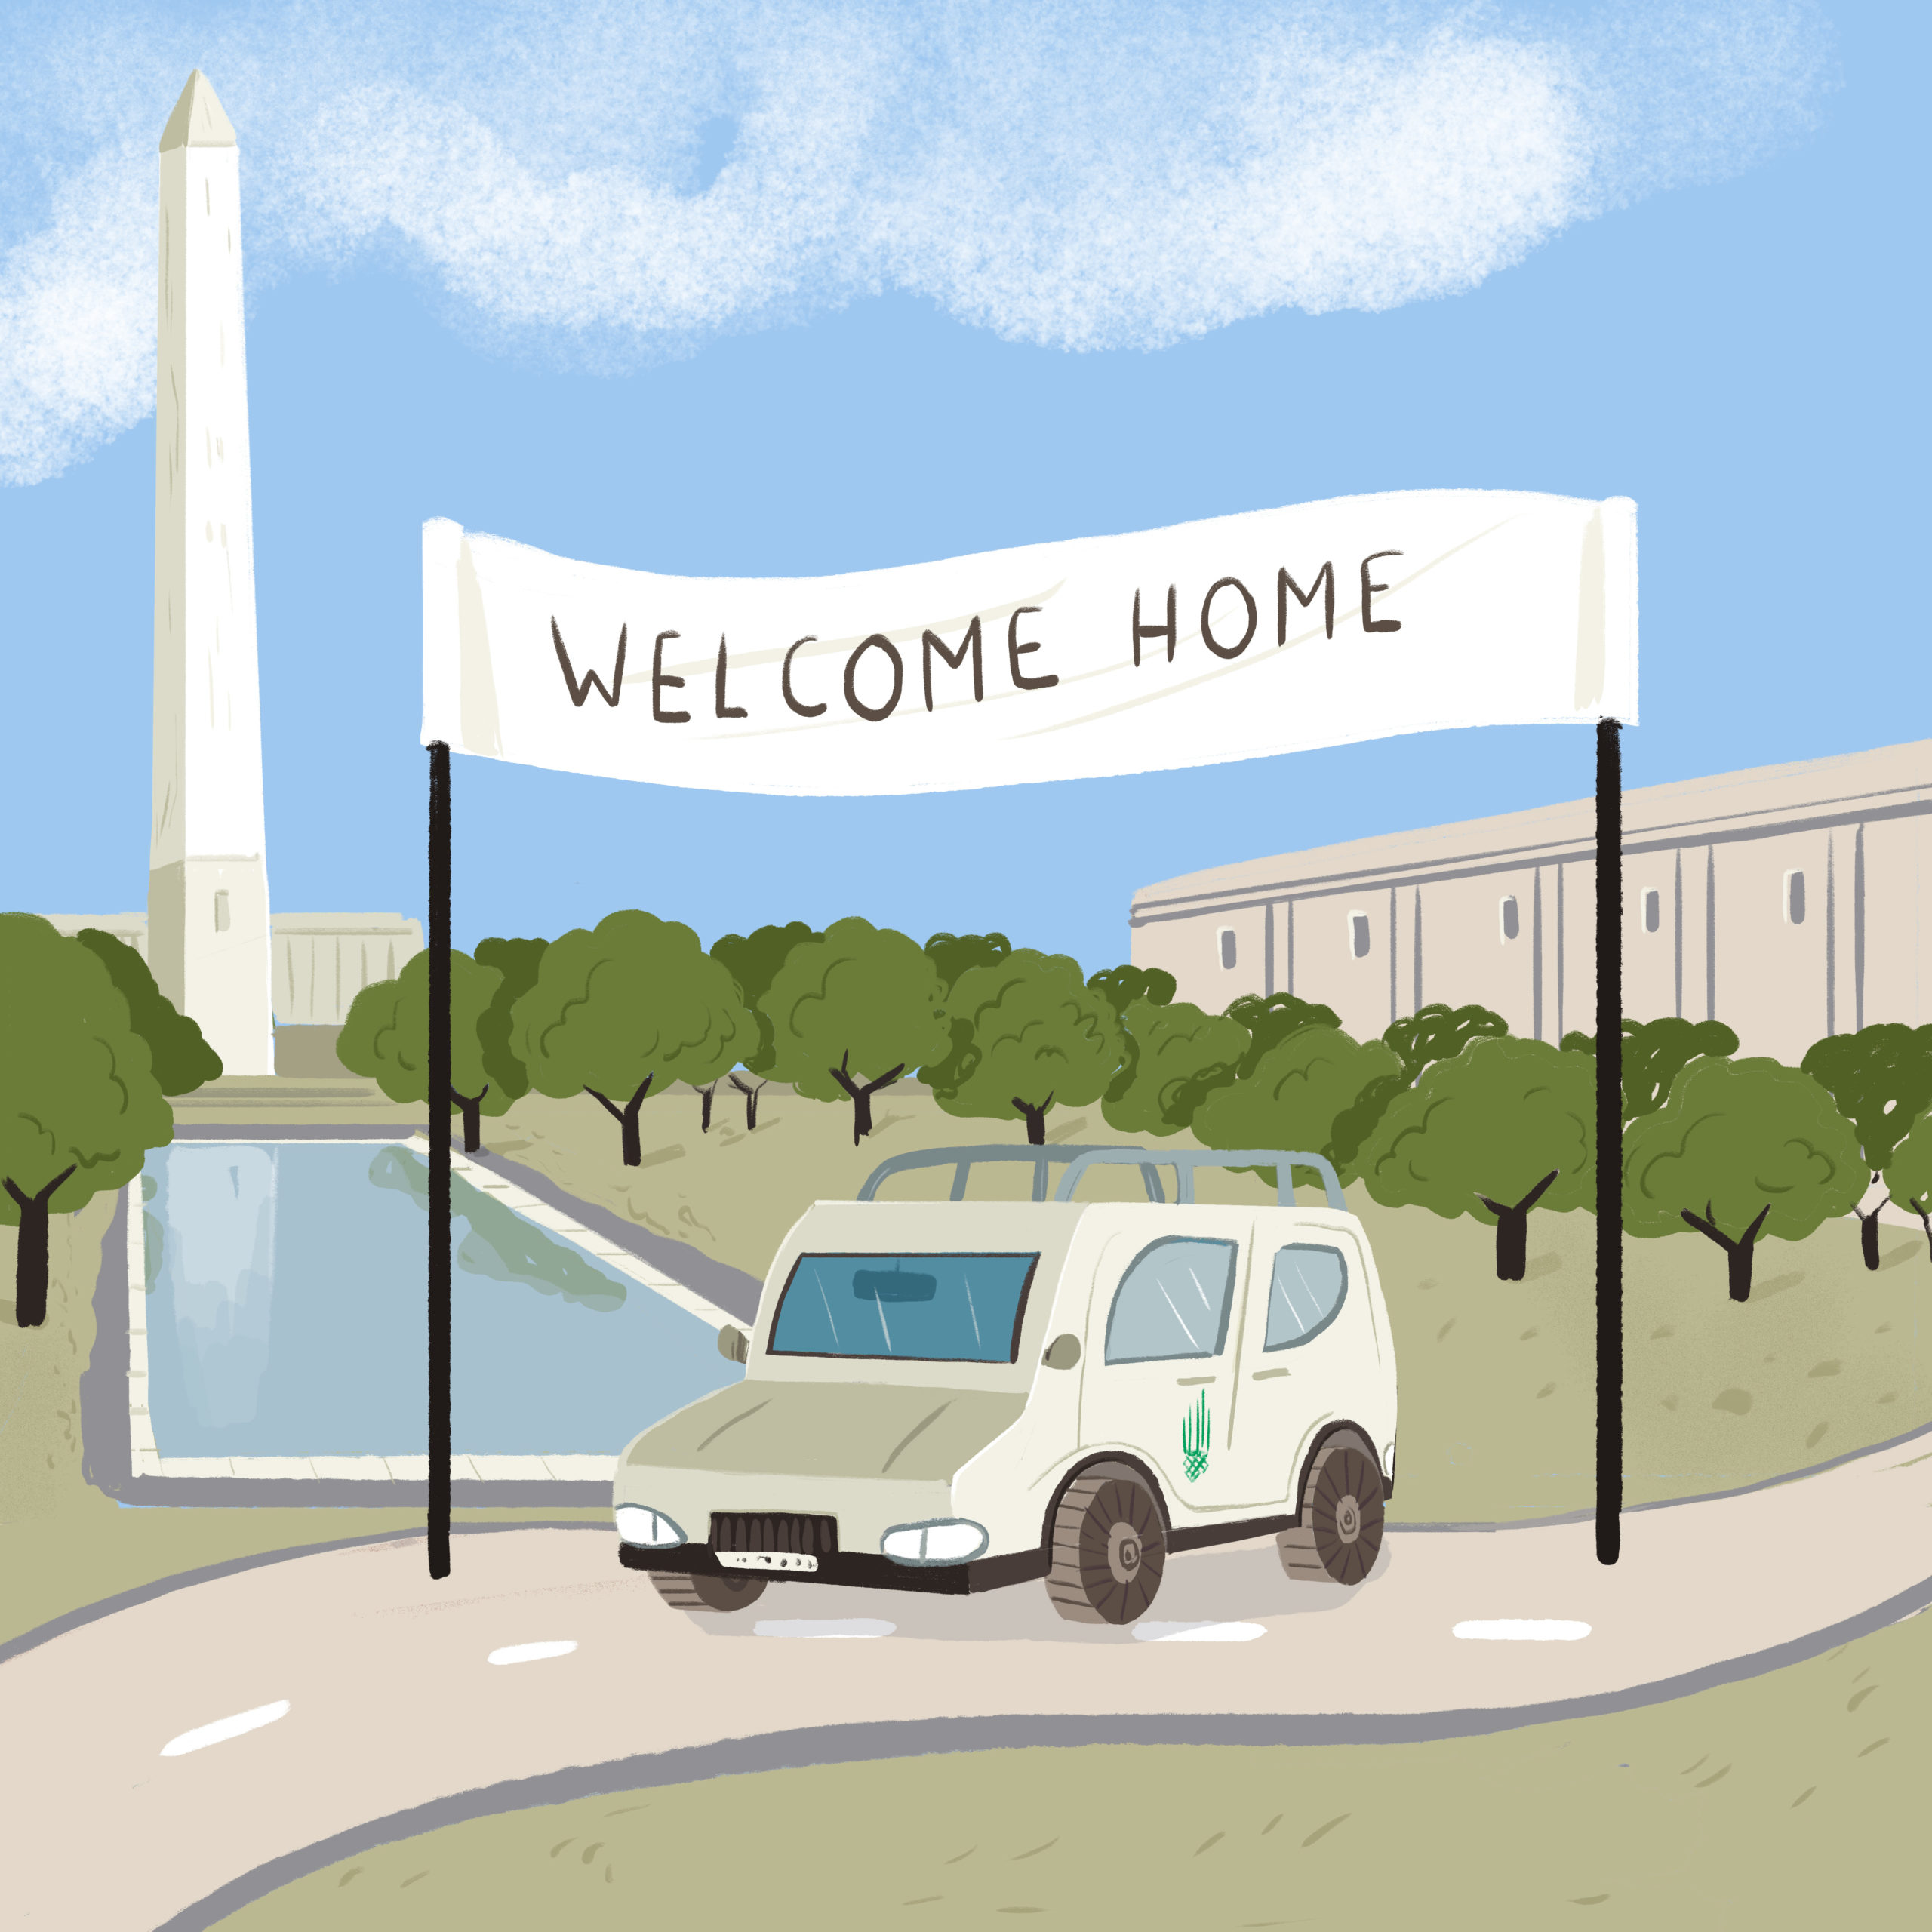 The Virtual Voyage truck with the AKF symbol parked under a banner saying "Welcome Home" in front of the Washington Monument